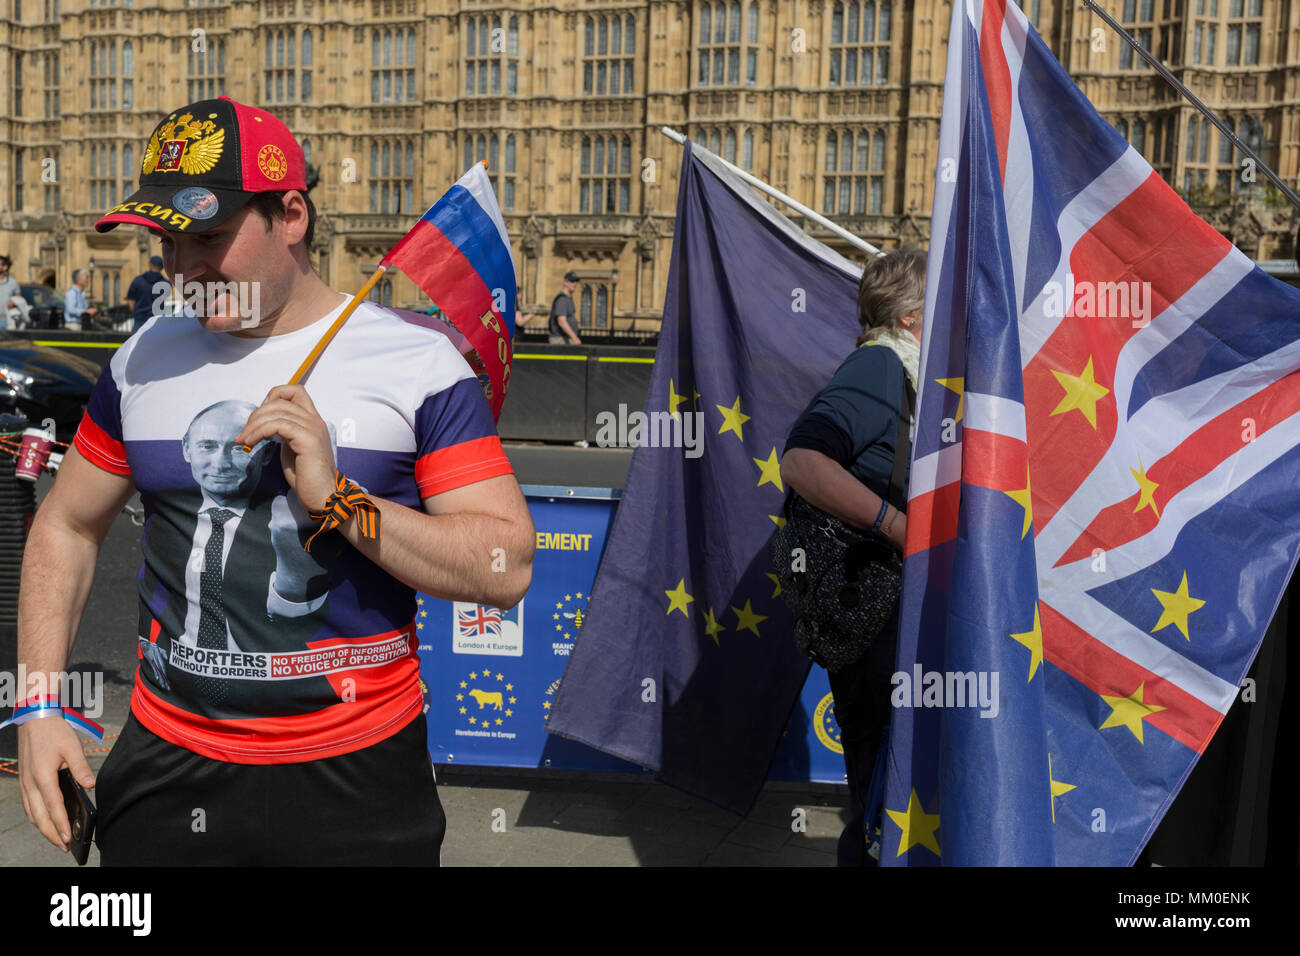 London, UK 9th May 2018: Russians and Russian-speakers from around the Russian Federation and former Soviet states (such as the Baltics) and of all generations, celebrate Victory Day, the annual commemoration remembering the sacrifice of Red Army heroes who defeated facism during WW2 - marching through the heart of British government in Whitehall, Parliament Square and ending outside Parliament itself. (Photo by Richard Baker / Alamy Live News) Stock Photo